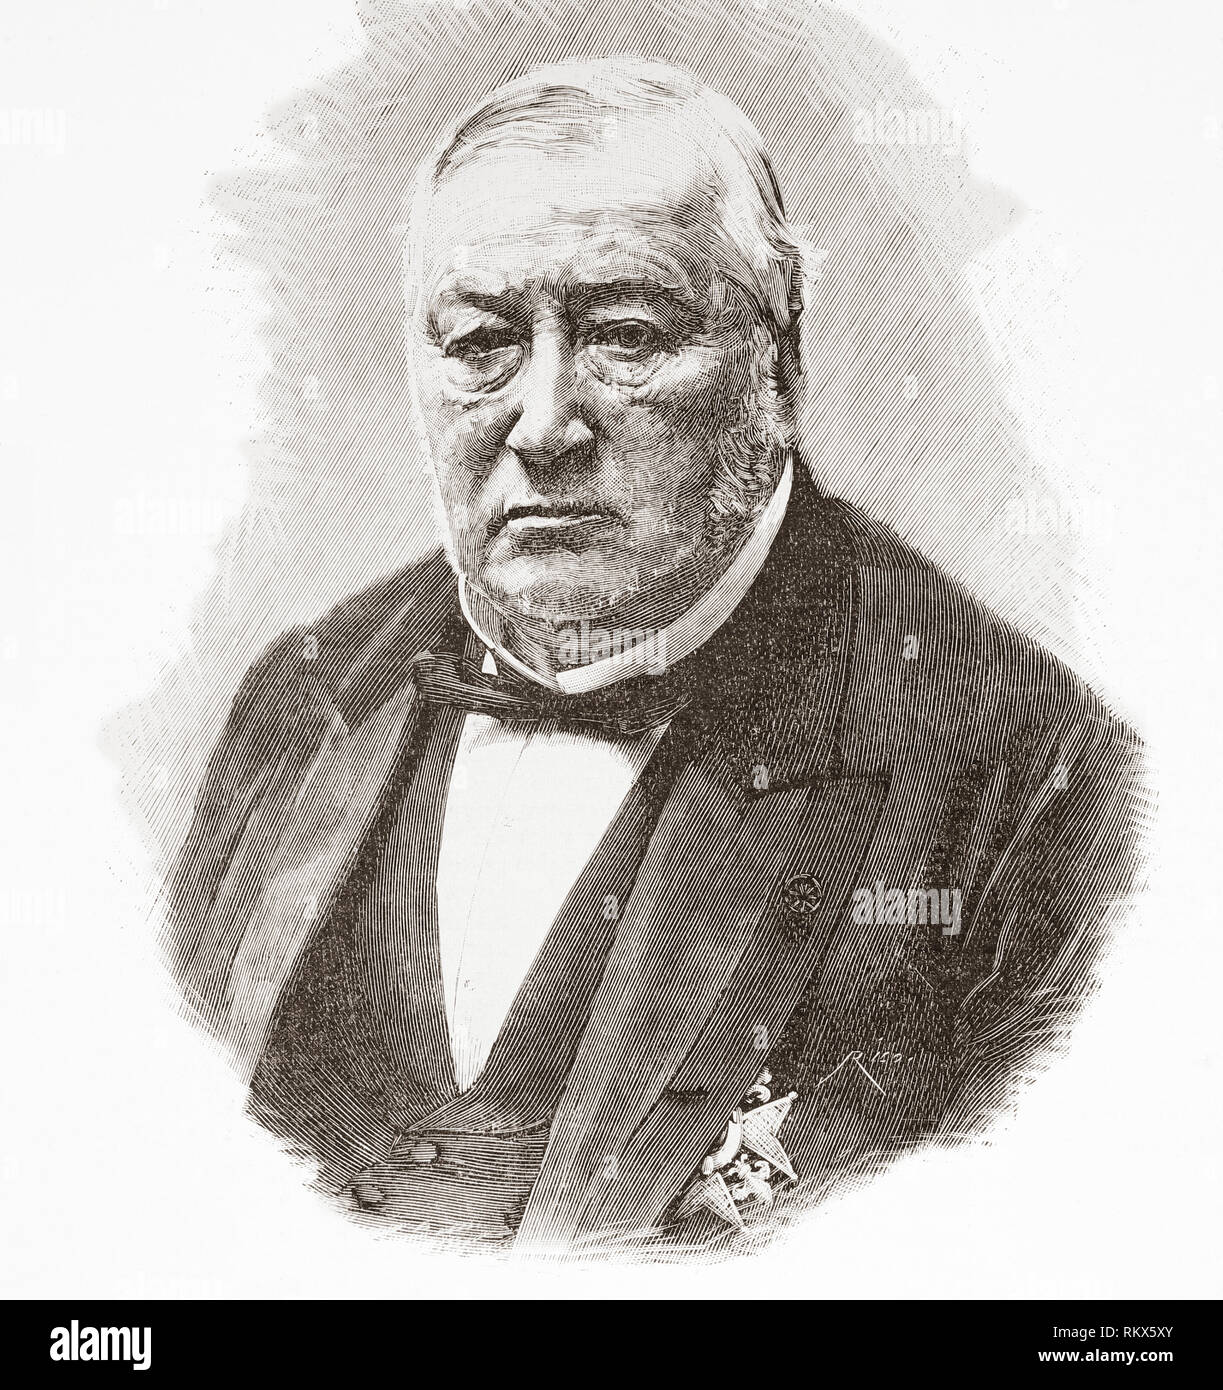 Daniel Bernard Weisweiller, 1814 – 1892.  German-born Spanish banker, an agent of Rothschild banking house in Madrid.  From La Ilustracion Espanola y Americana, published 1892. Stock Photo